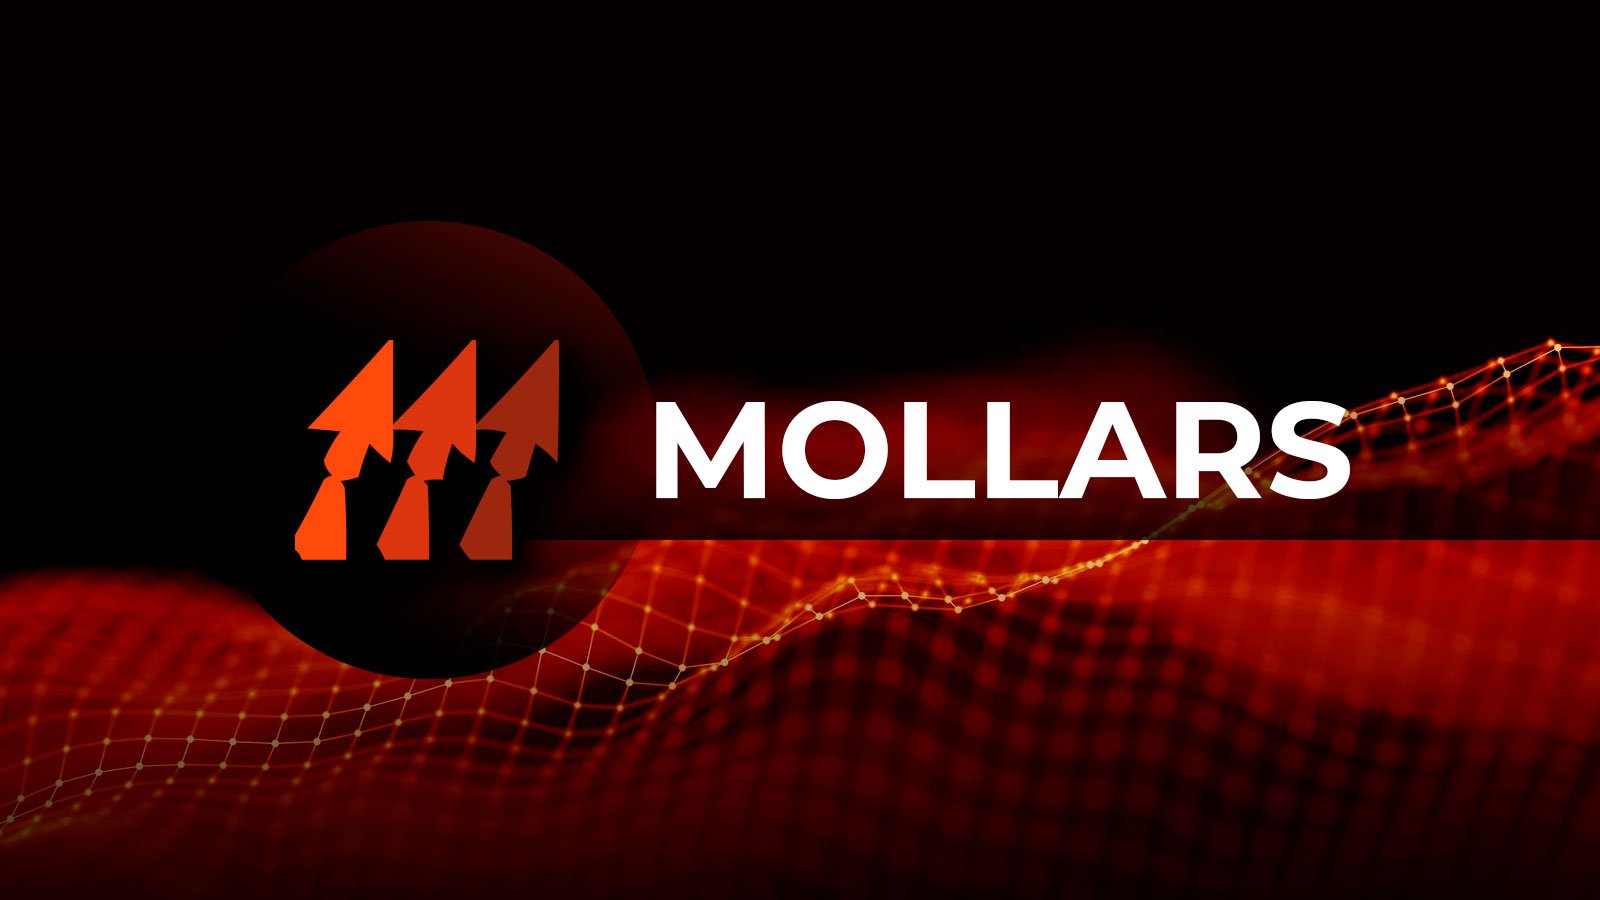 Mollars Token To Be Used For New Blockchain or Crypto Exchange After Presale Ends